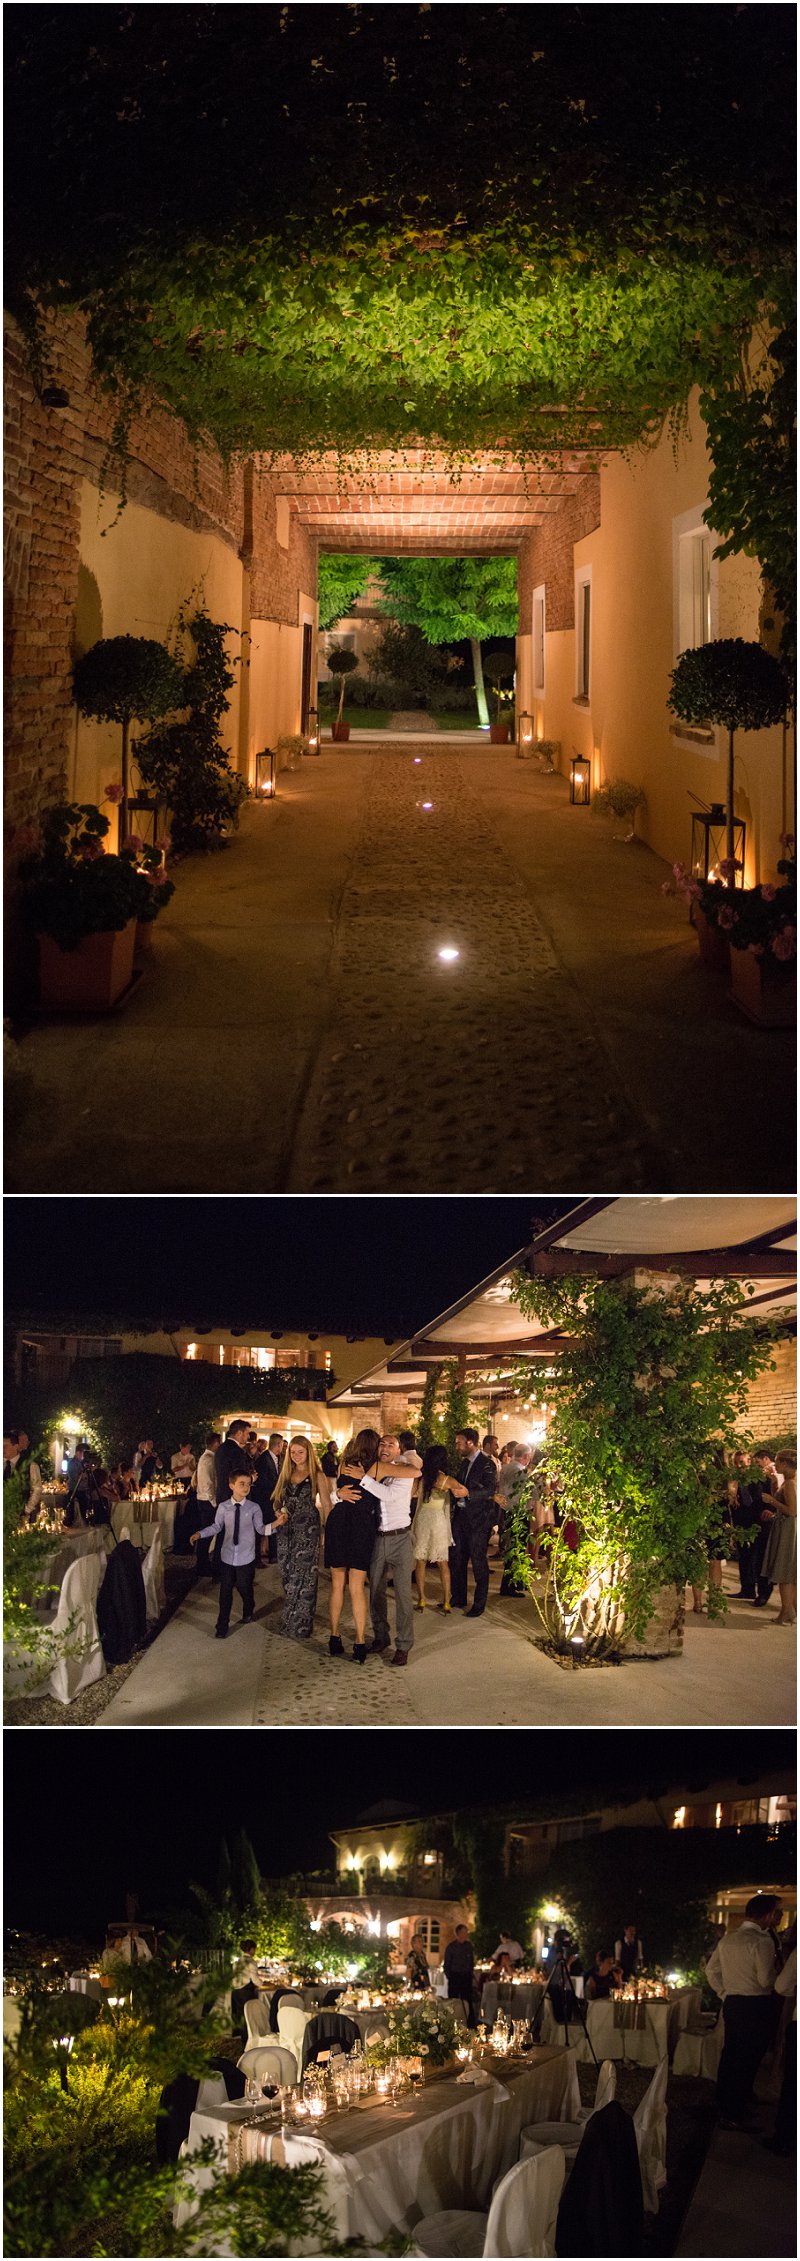 La Villa evening reception by candlelight in Italy